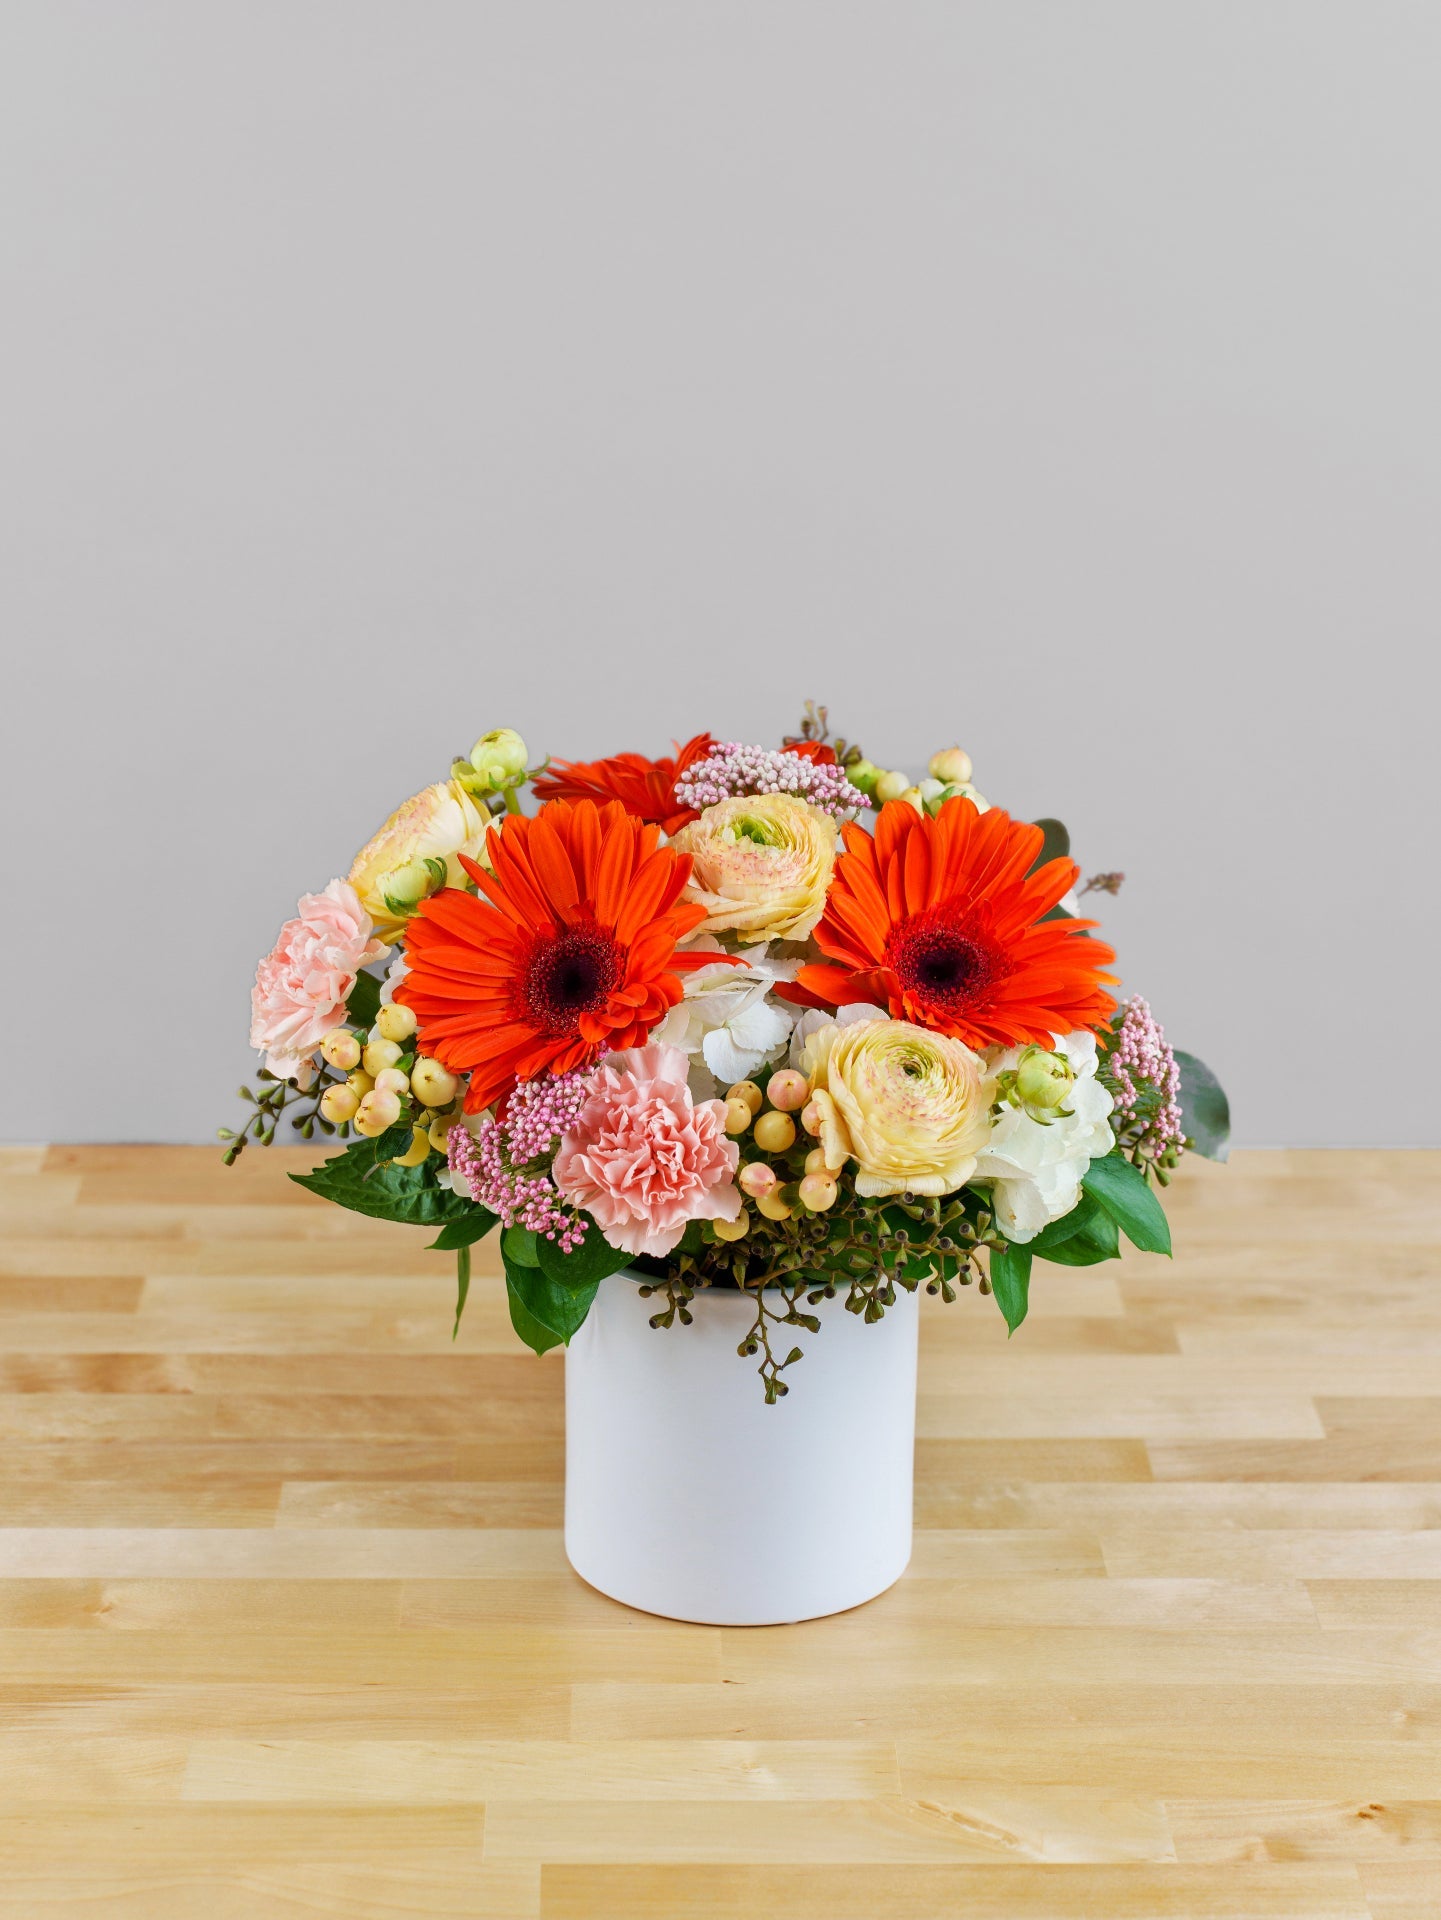 Delightful Roses and Daisy Bouquet by V Florist